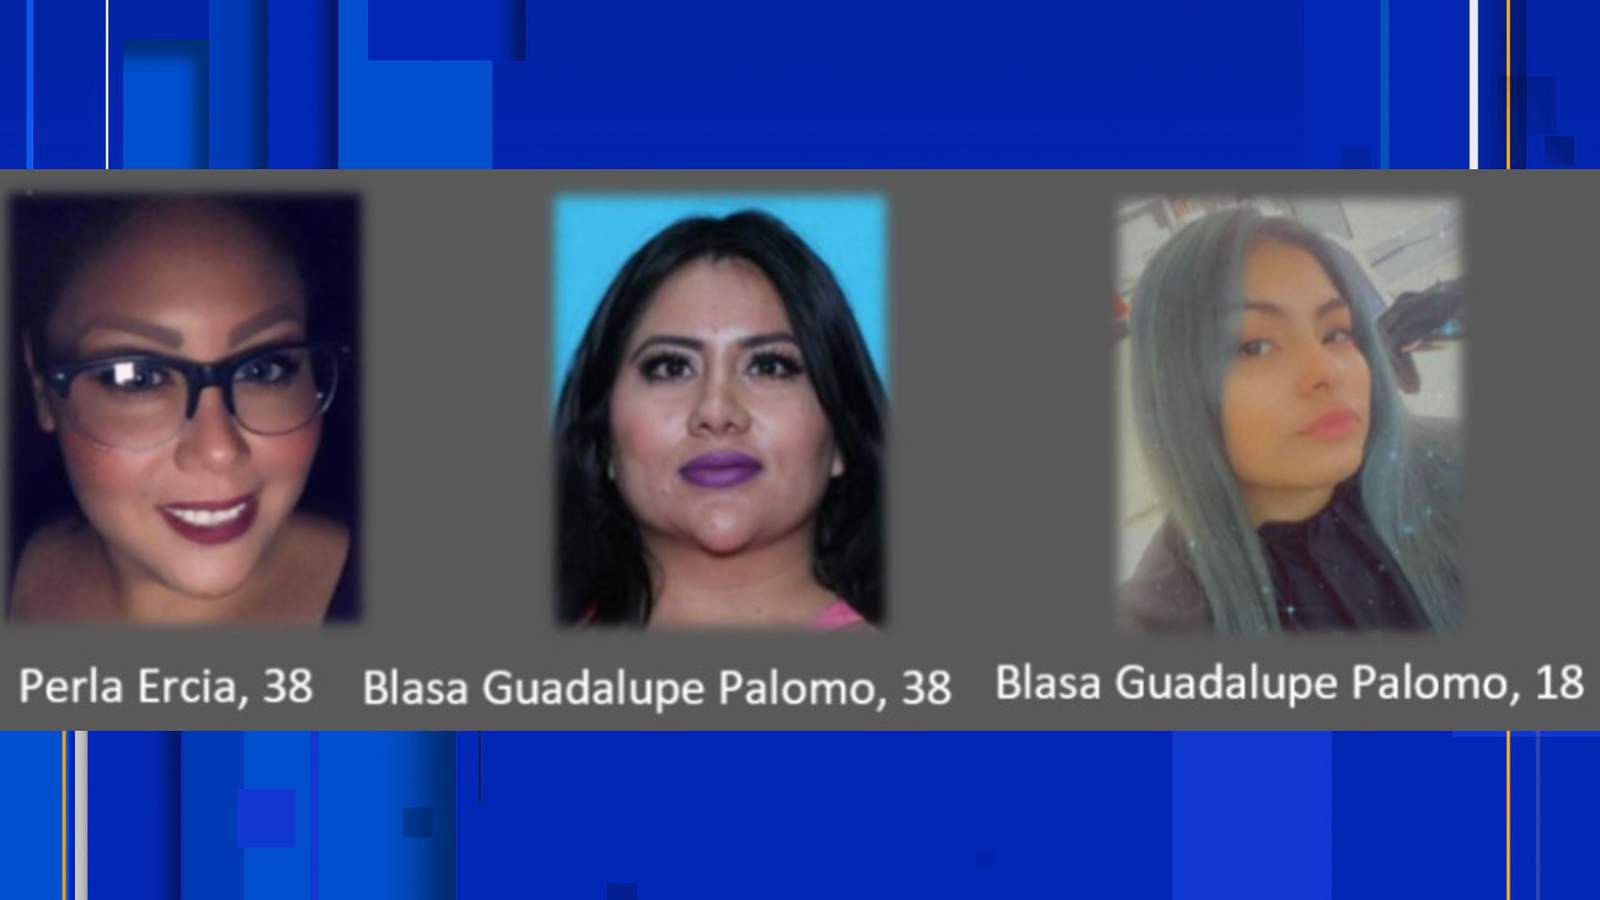 FBI seeks public’s help in finding 3 women who may have been kidnapped in Mexico